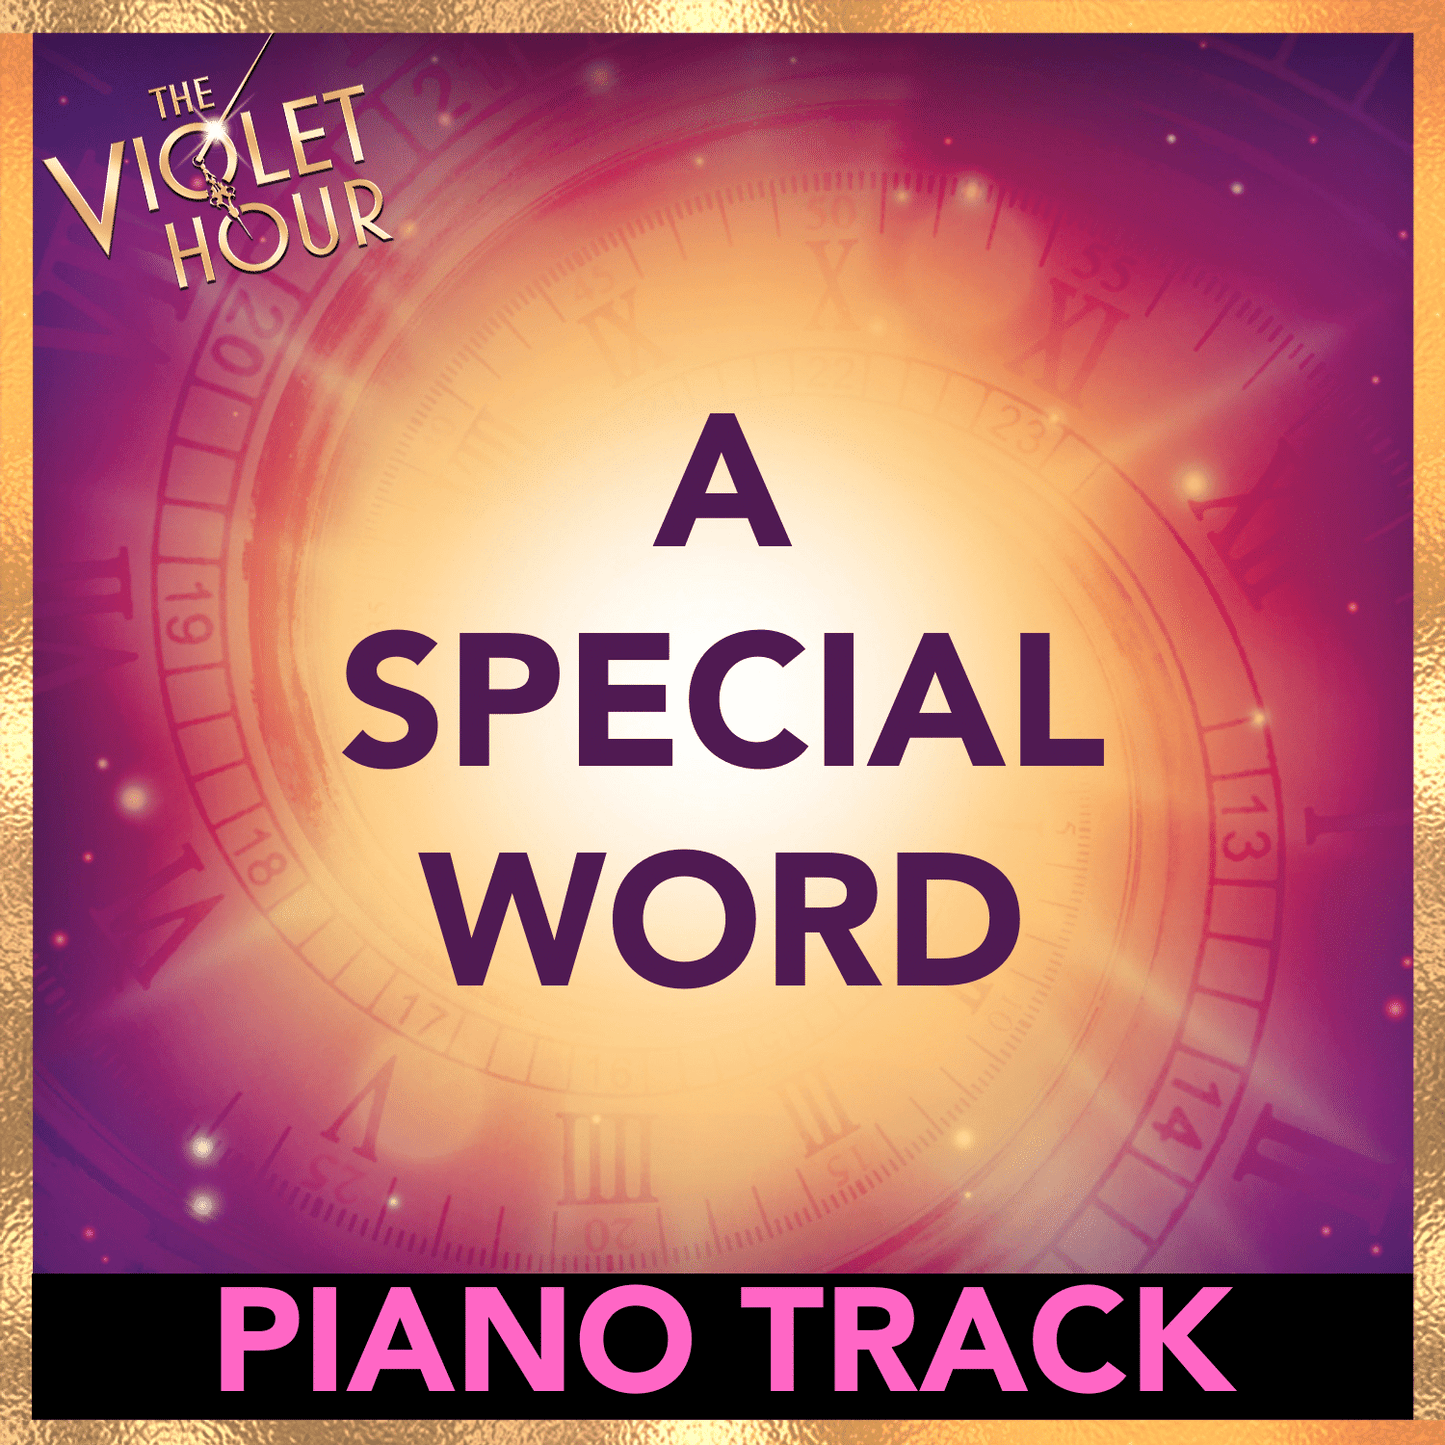 A SPECIAL WORD (Piano Track)